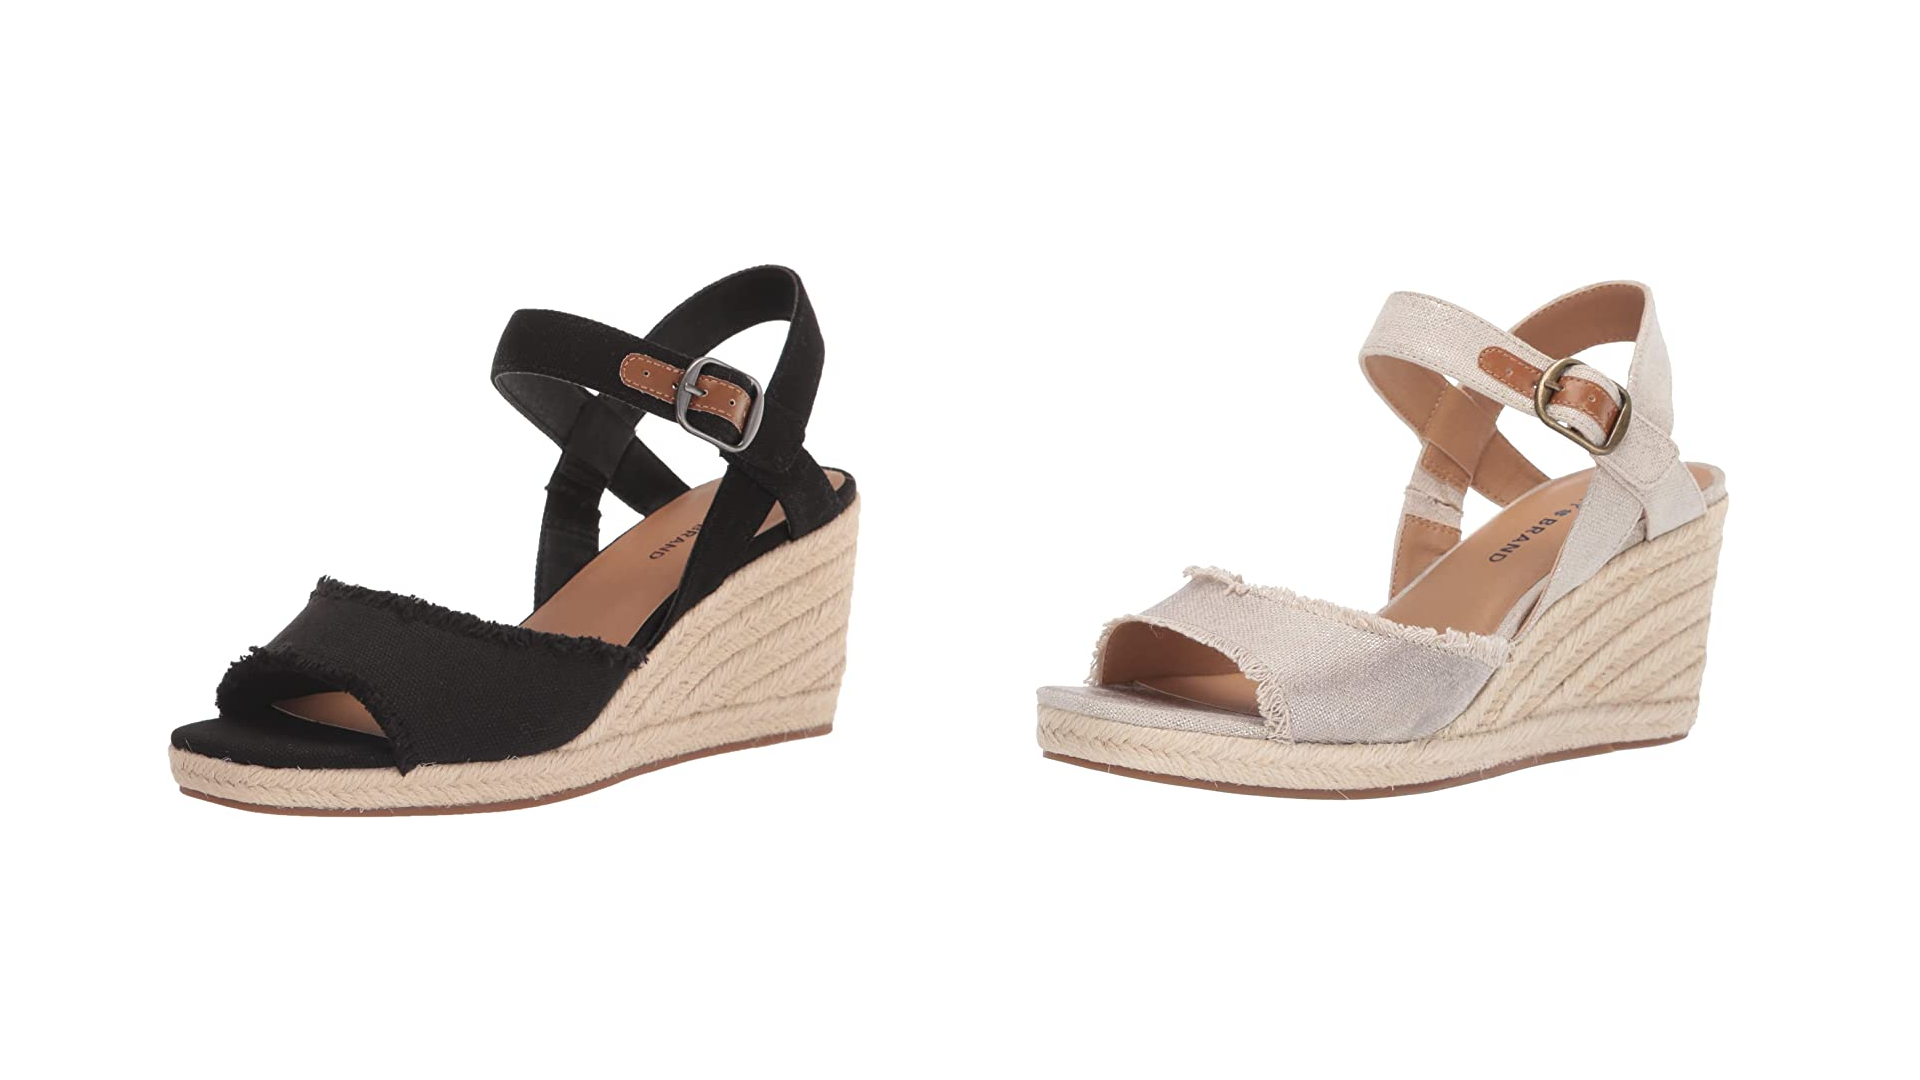 Dancing shoes lucky brand wedges